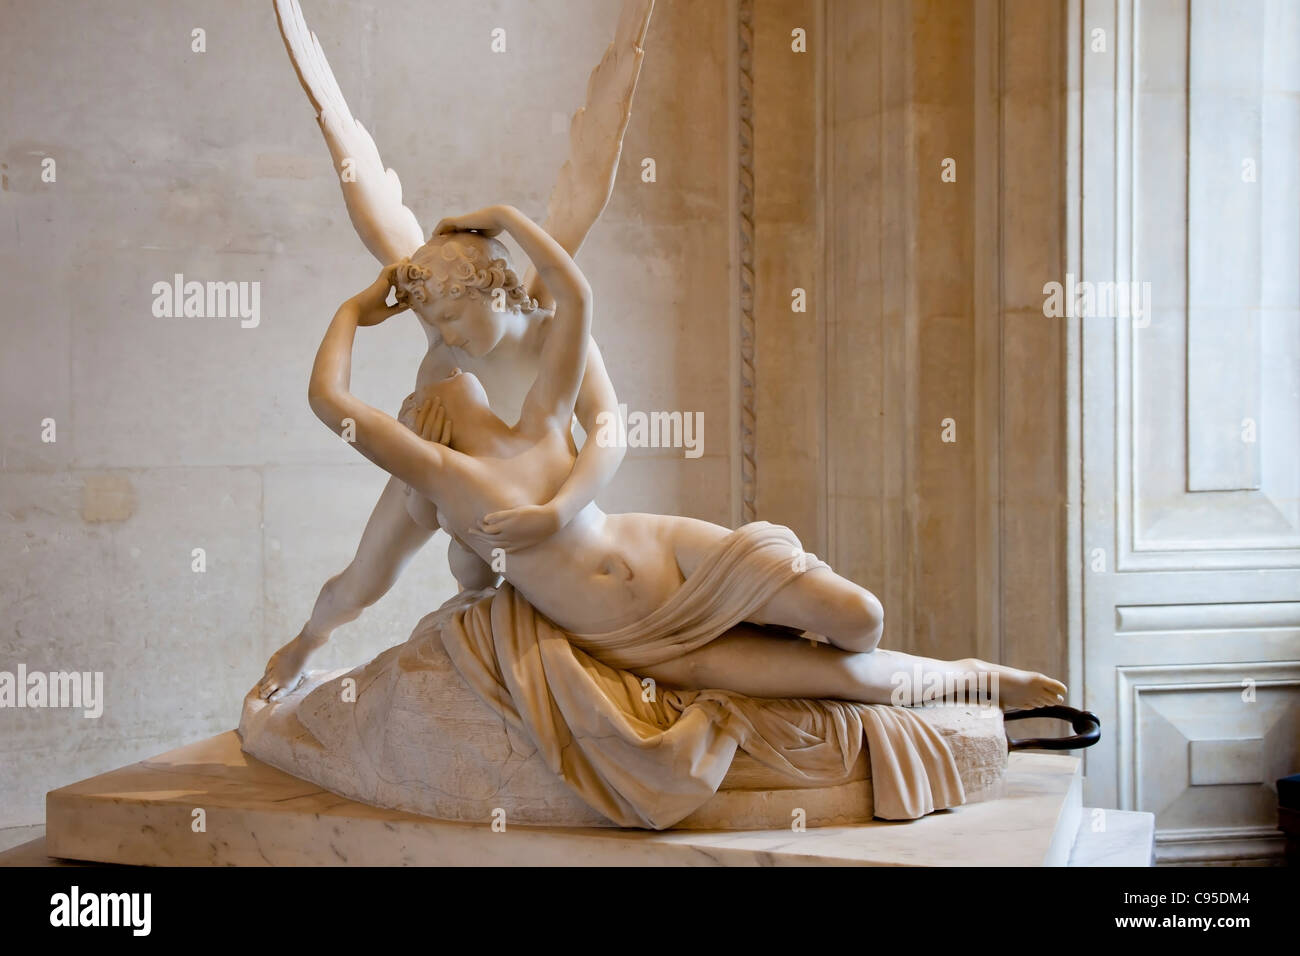 Musee du Louvre - Statue of 'Psyche Revived by Cupid's Kiss' by Antonio Canova, Paris France Stock Photo